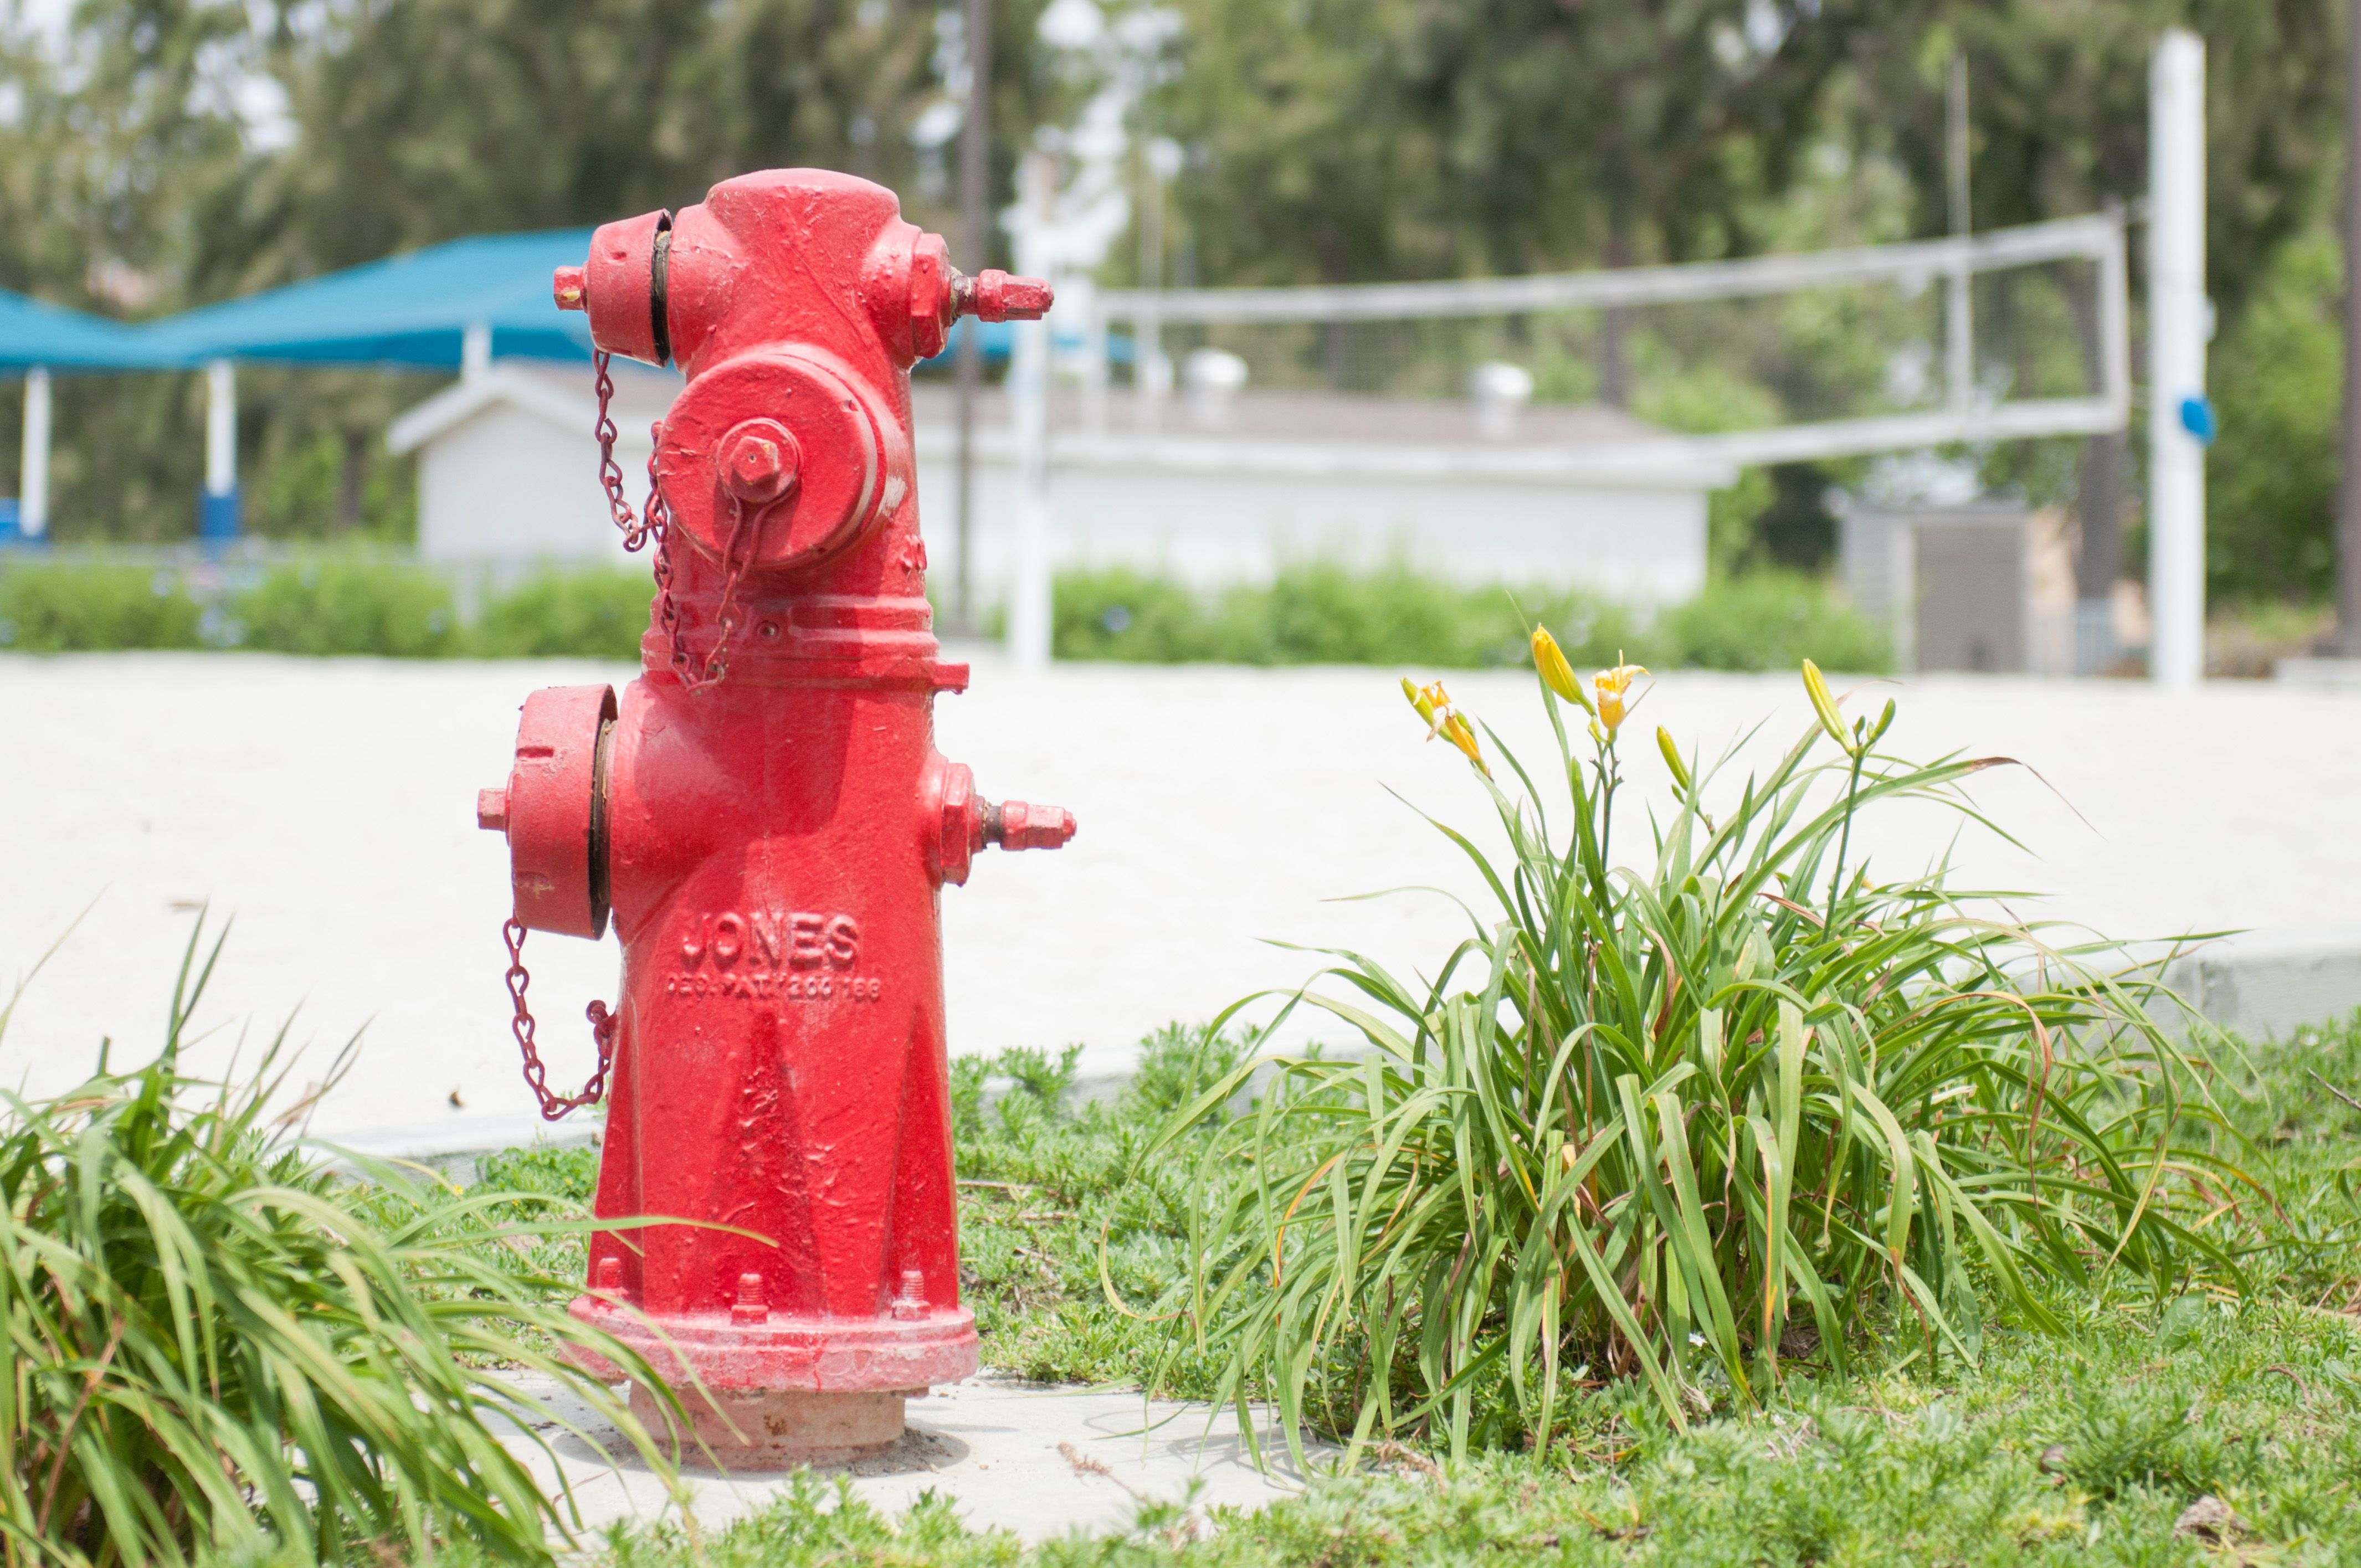 Red fire hydrant in front of a sand volleyball court